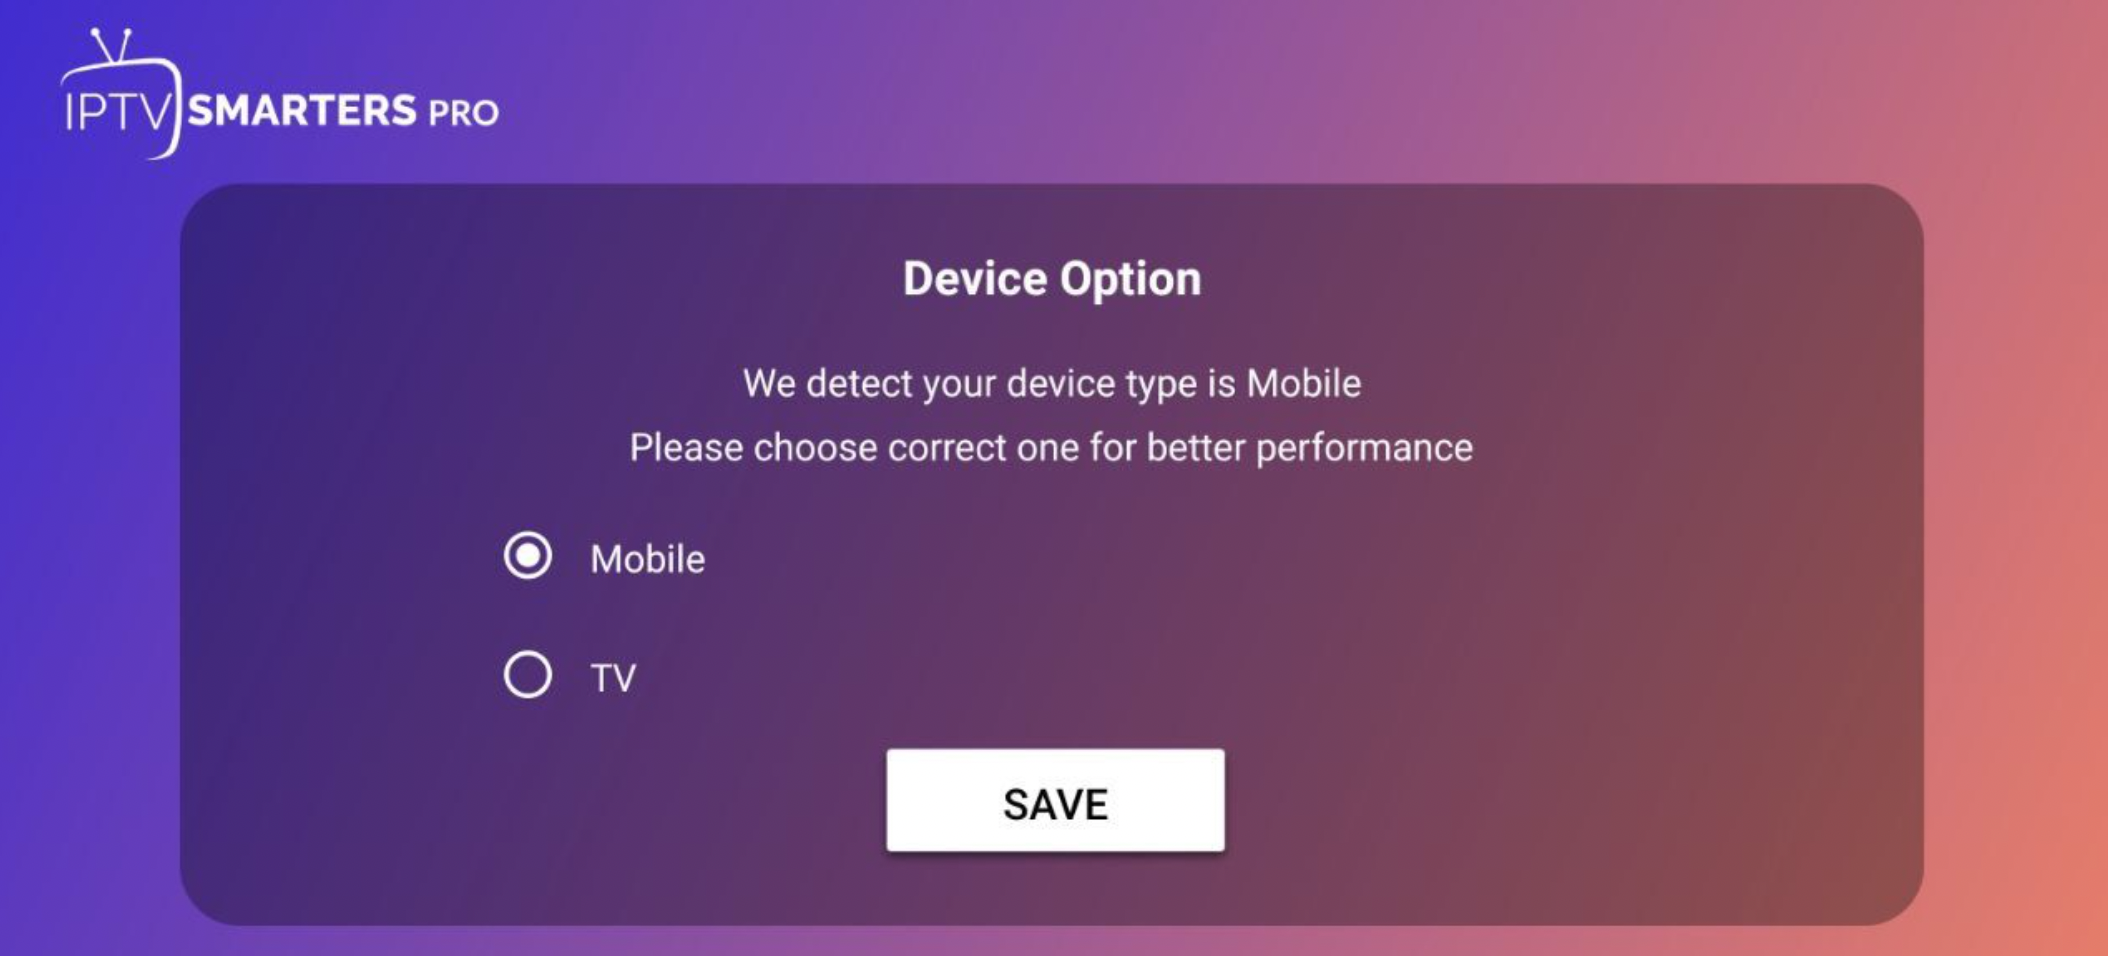 Device Options - IPTV Smarters Pro APK on Android